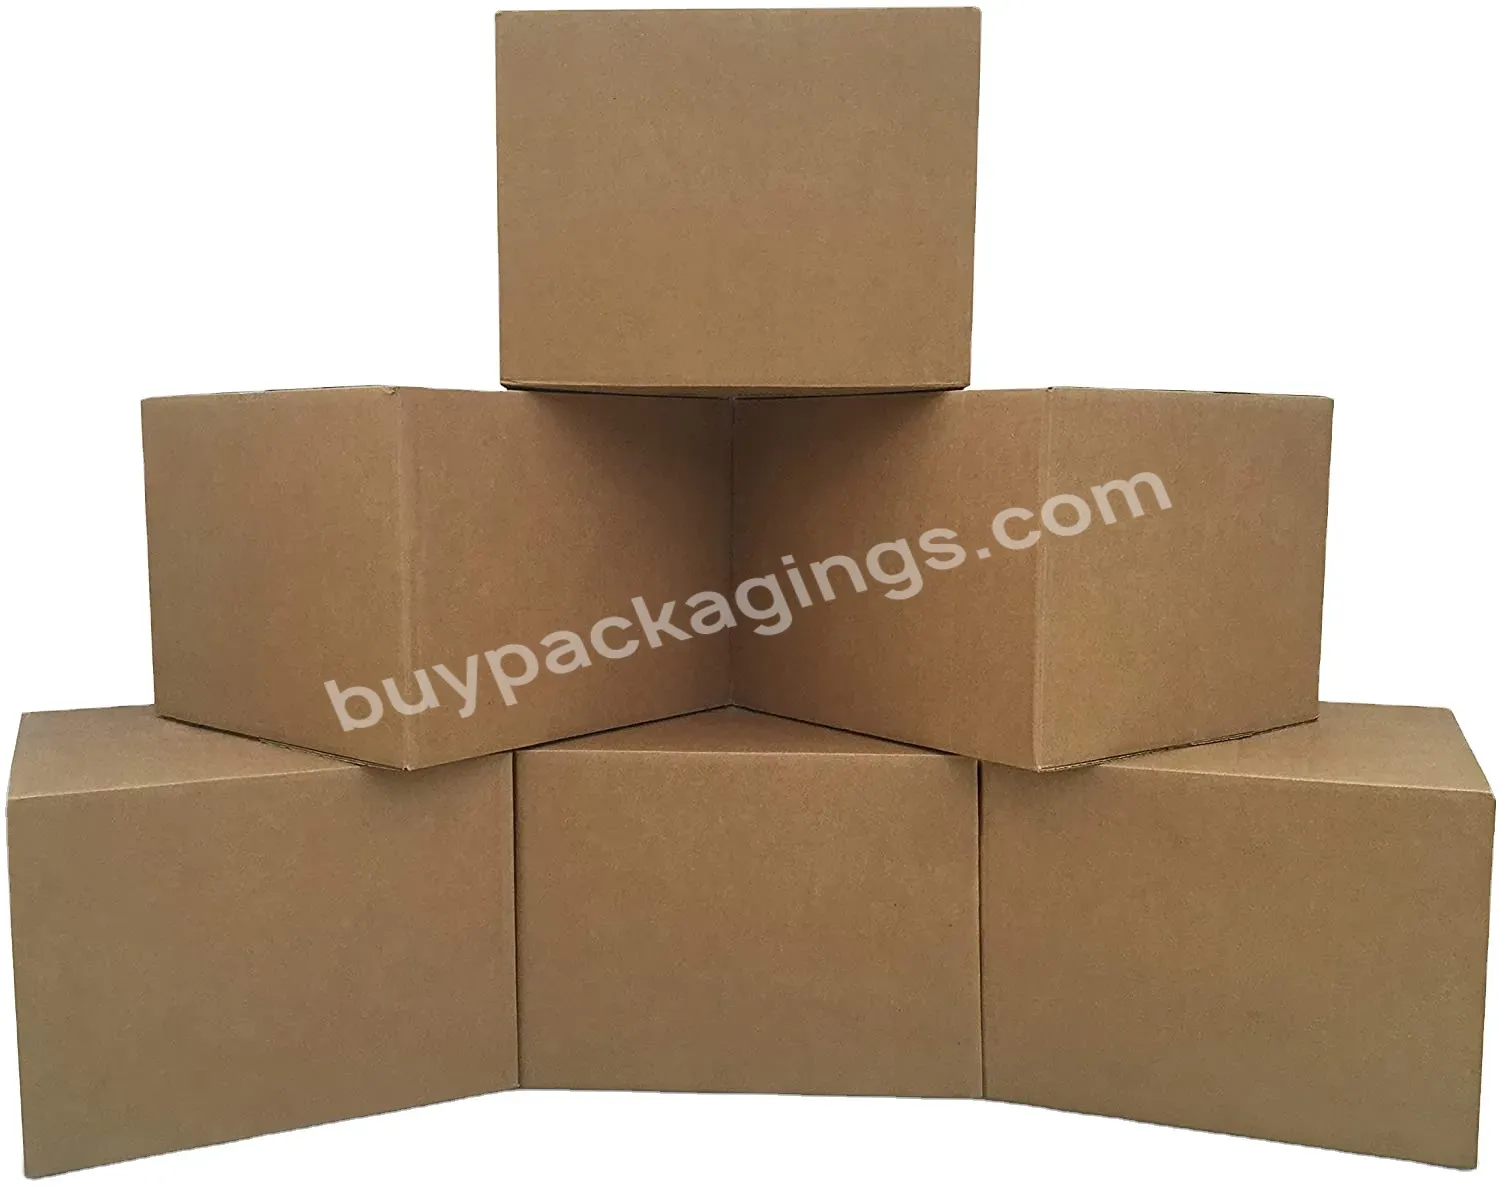 Chinese Professional Production Custom Packaging Shipping Boxes Corrugated Cardboard Carton Storage Box - Buy Packaging Cardboard Boxes,Cardboard Storage Boxes,Corrugated Cardboard Carton Box.